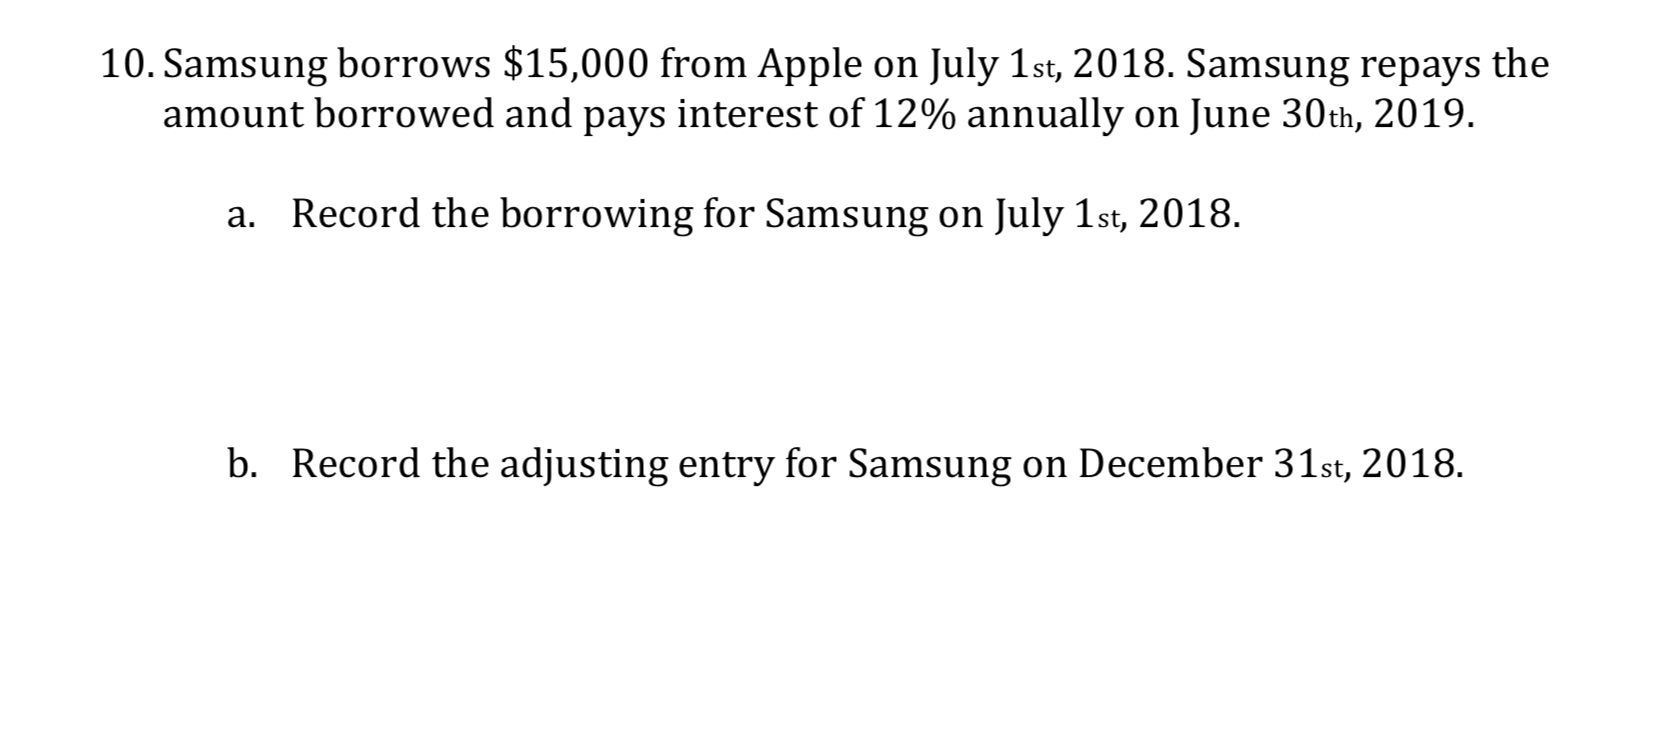 10. Samsung borrows $15,000 from Apple on July 1st, 2018. Samsung repays the
amount borrowed and pays interest of 12% annually on June 30th, 2019.
Record the borrowing for Samsung on July 1st, 2018.
a.
31st, 2018
b. Record the adjusting entry for Samsung on Dece
